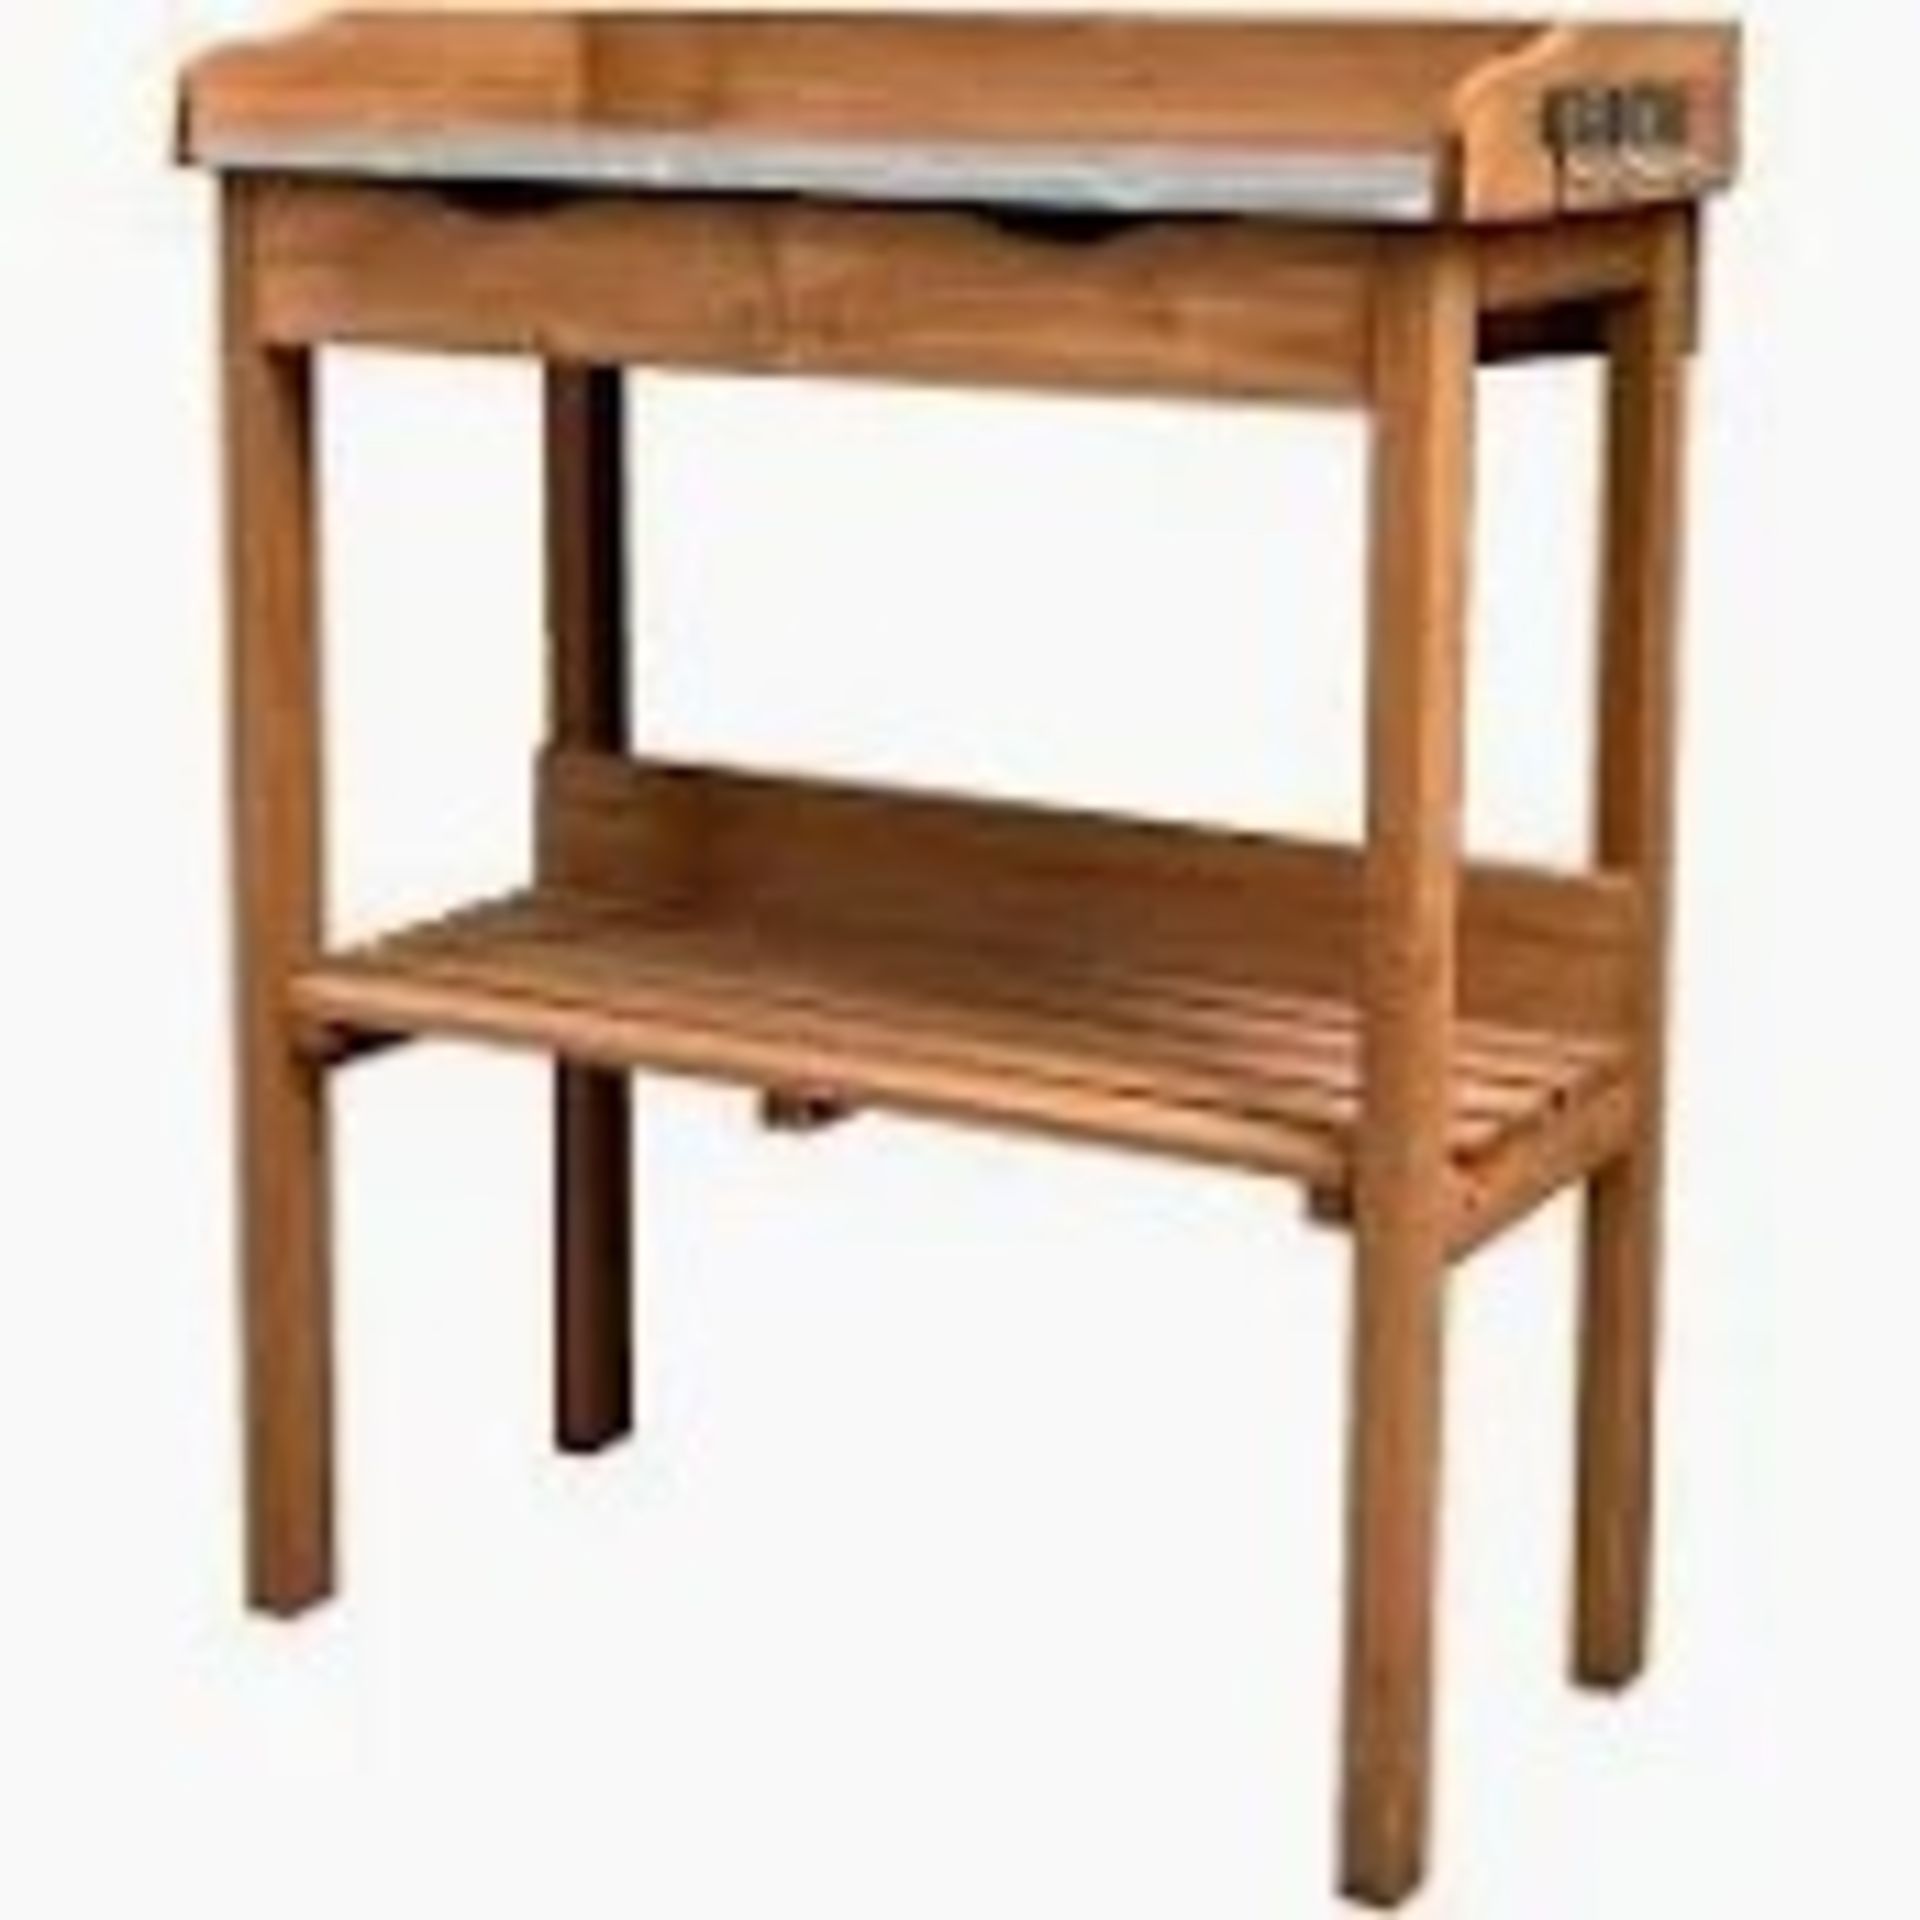 Garden Potting Bench with Two Drawers & Shelf - ER 41